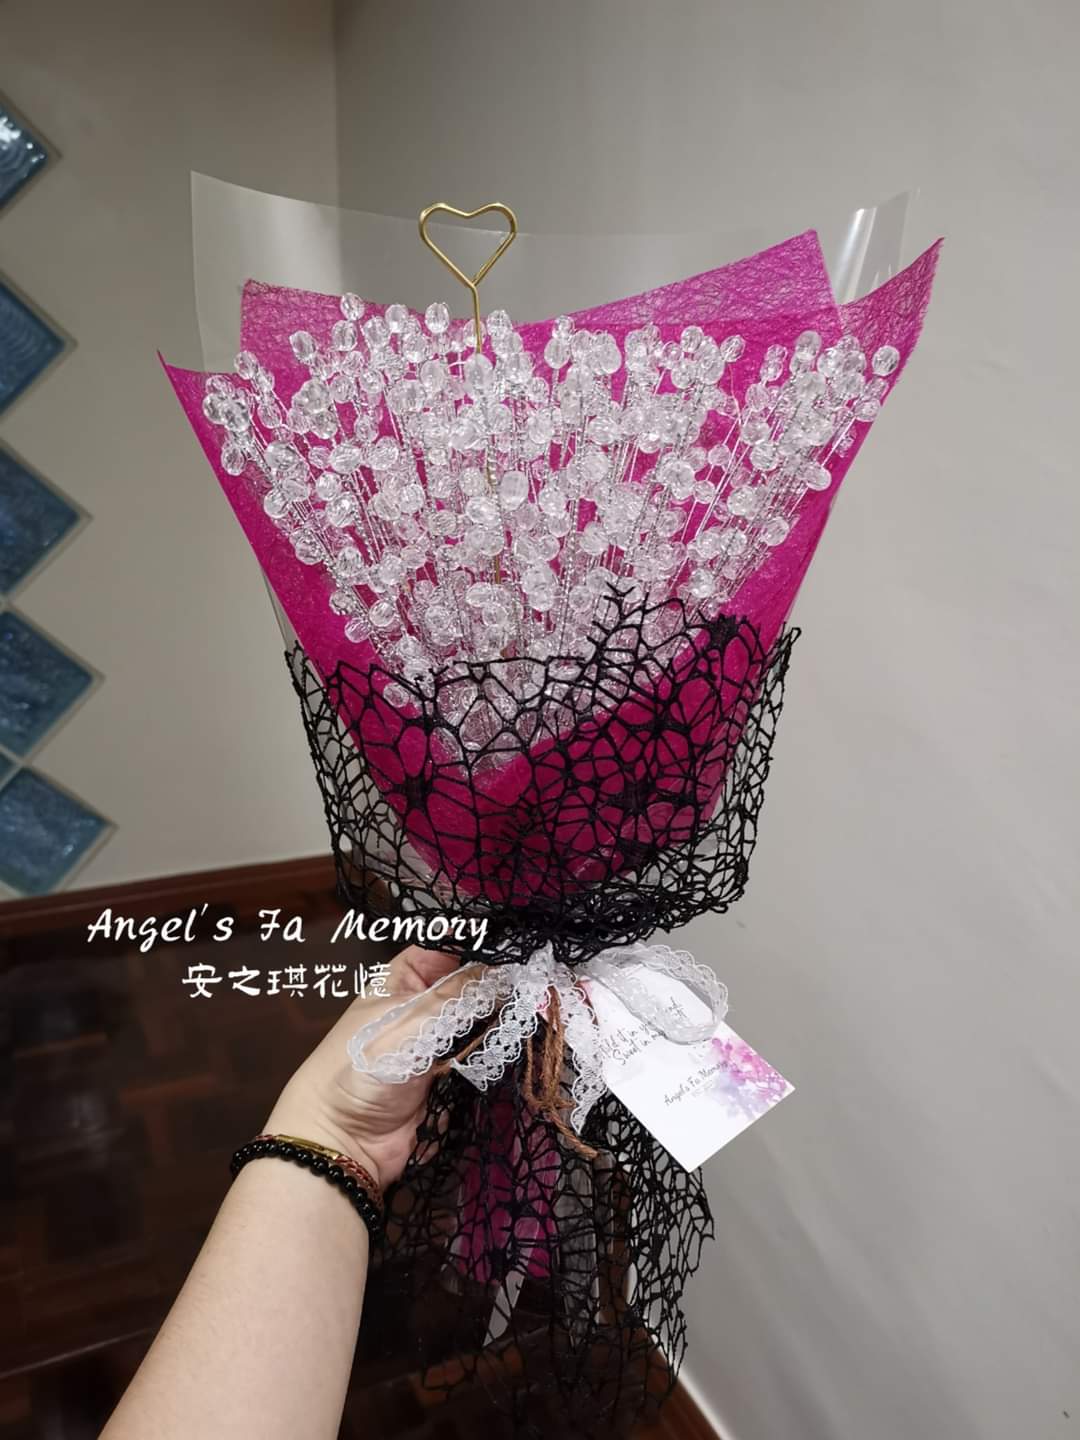 Pink and black butterfly bouquet